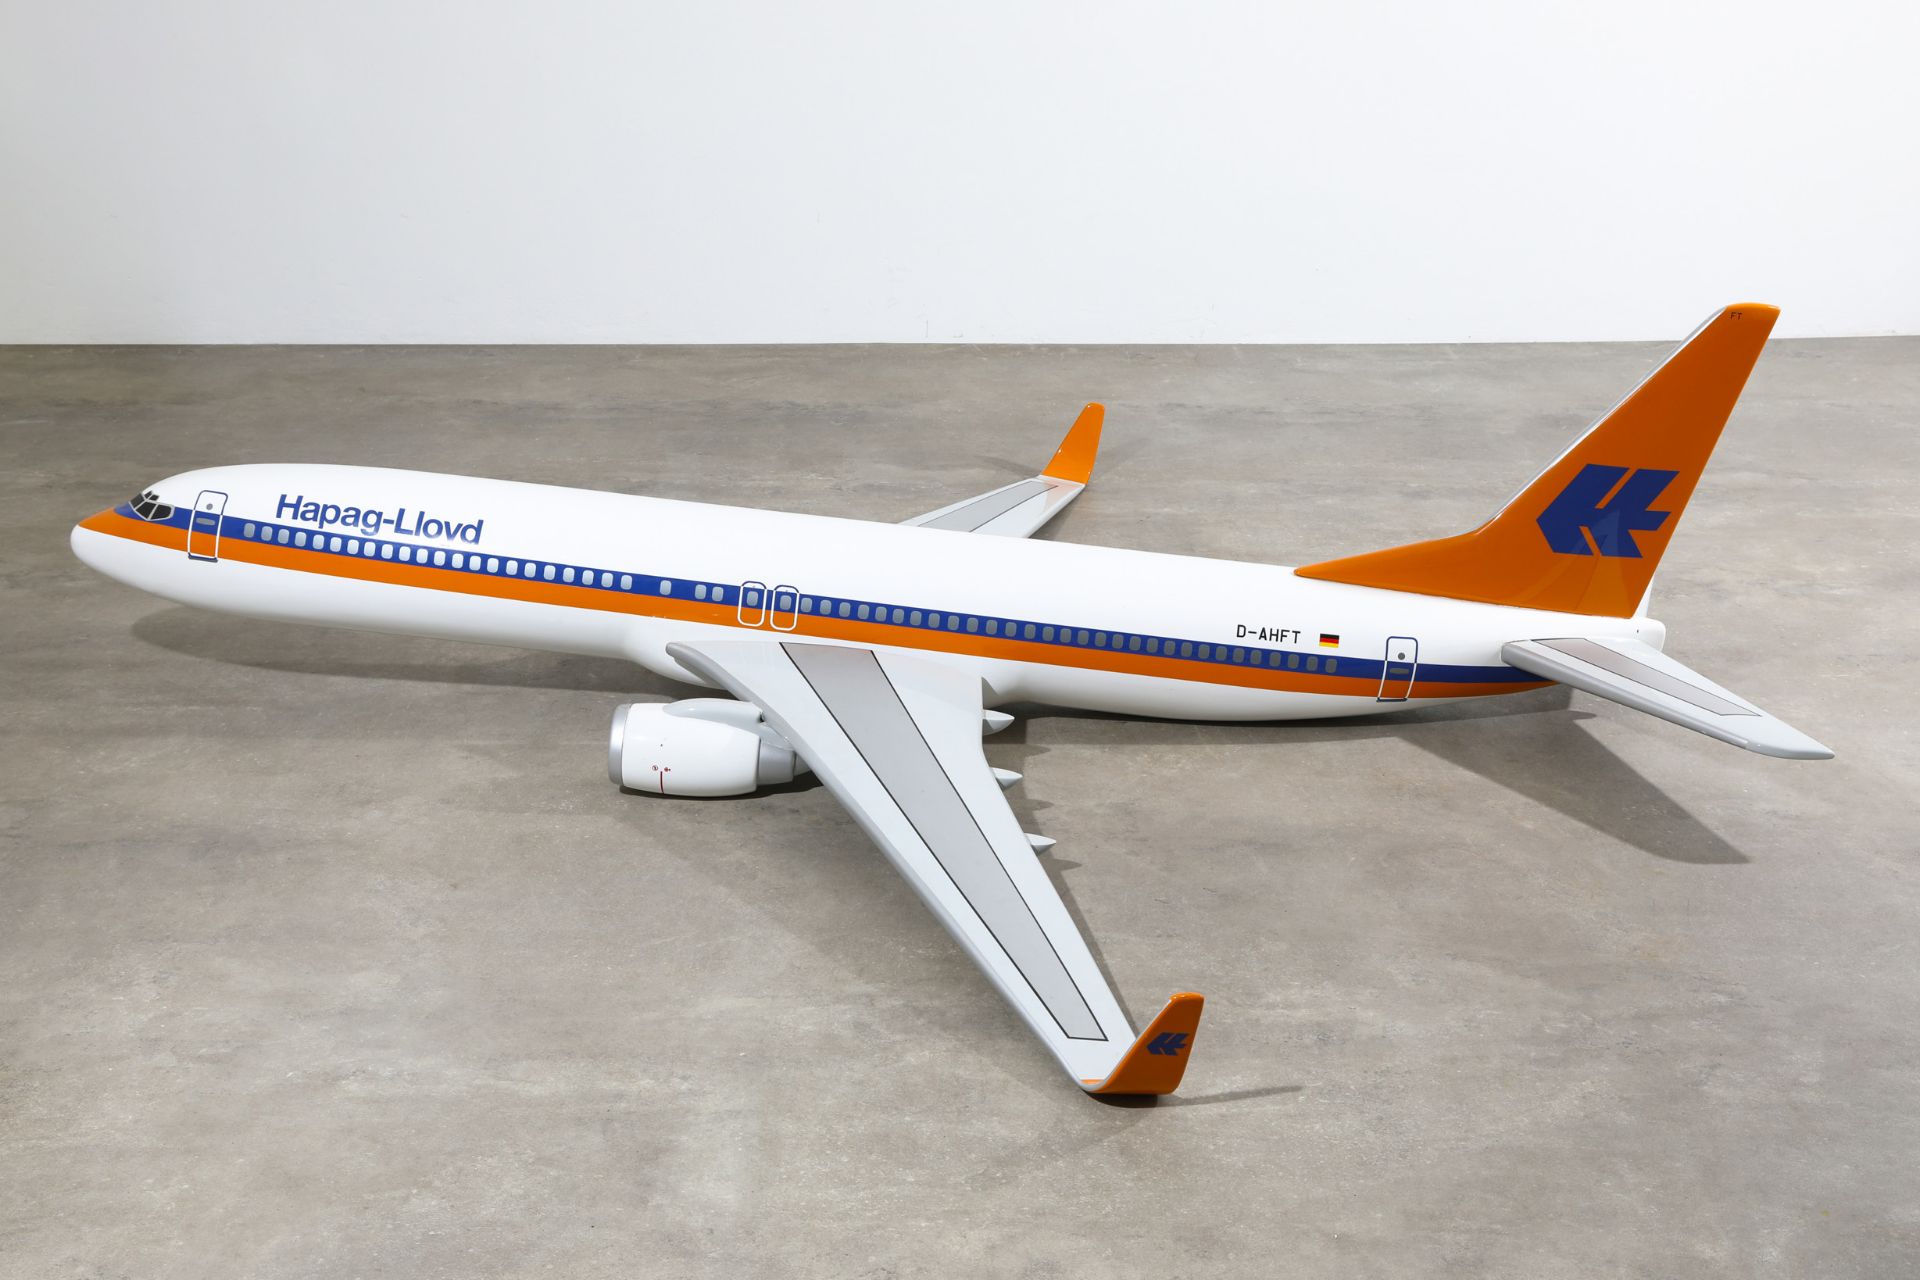 Hapag Lloyd, Boeing 737, large aircraft model, scale 1:12 - Image 4 of 5